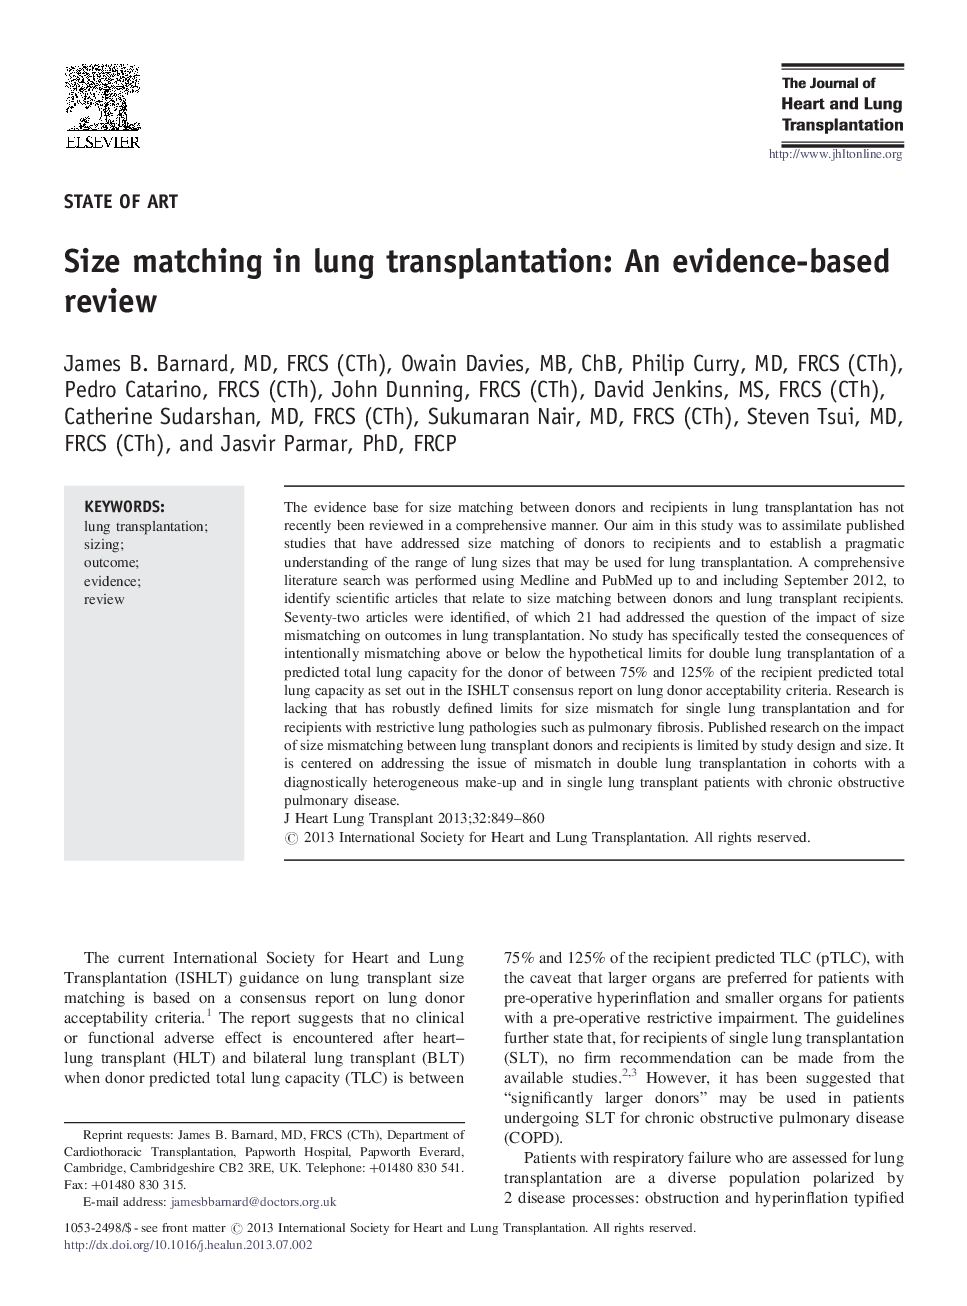 Size matching in lung transplantation: An evidence-based review